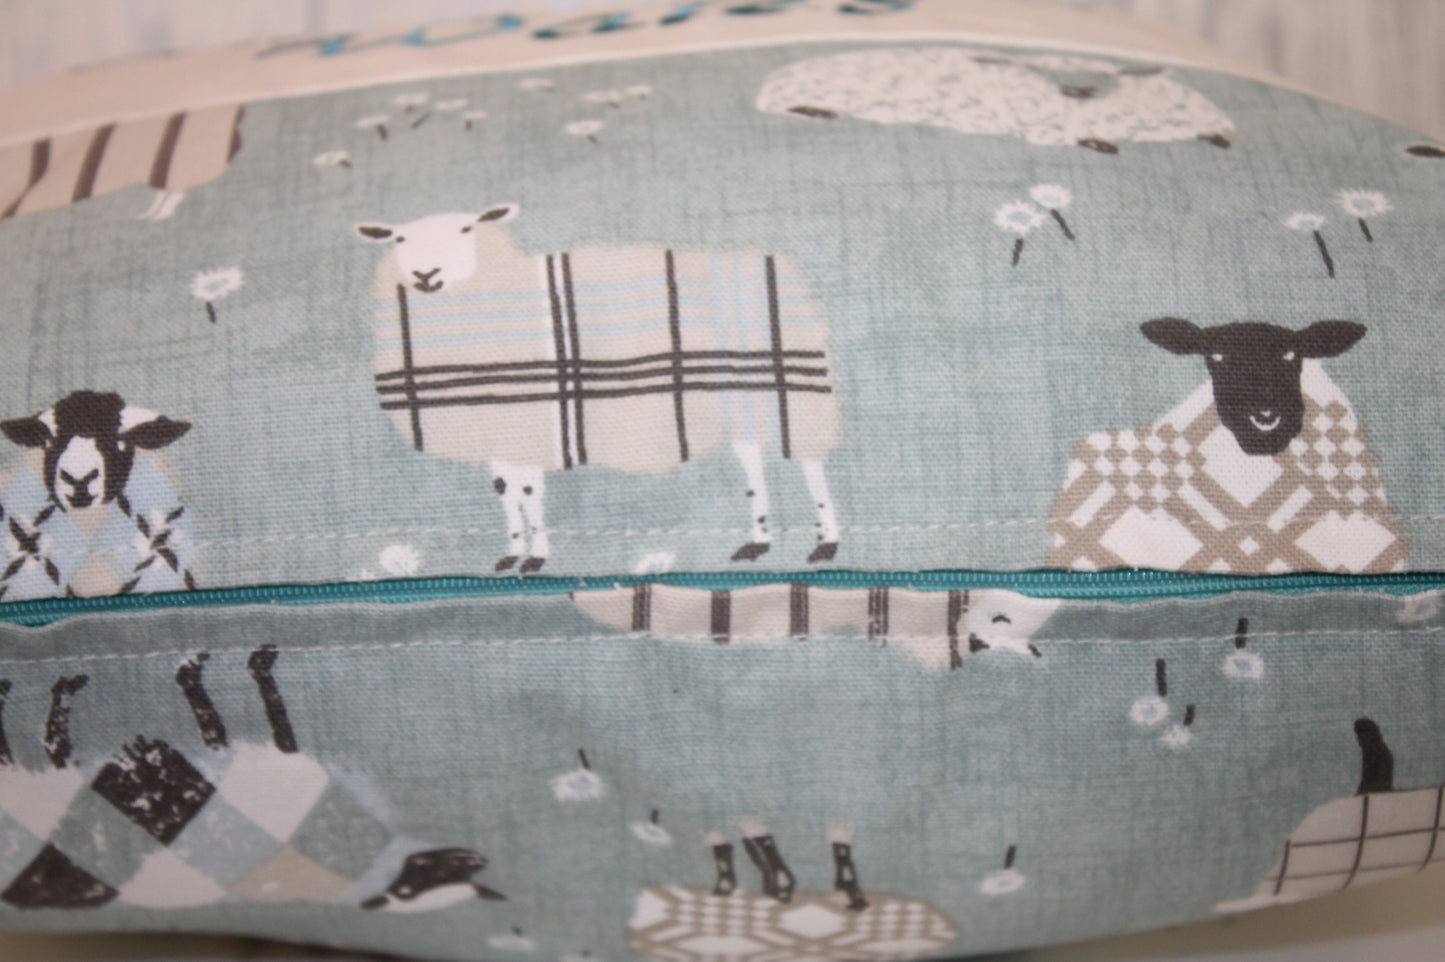 Cwtches and cuddles welsh quotes-Duckegg Sheep panel 16" cushion